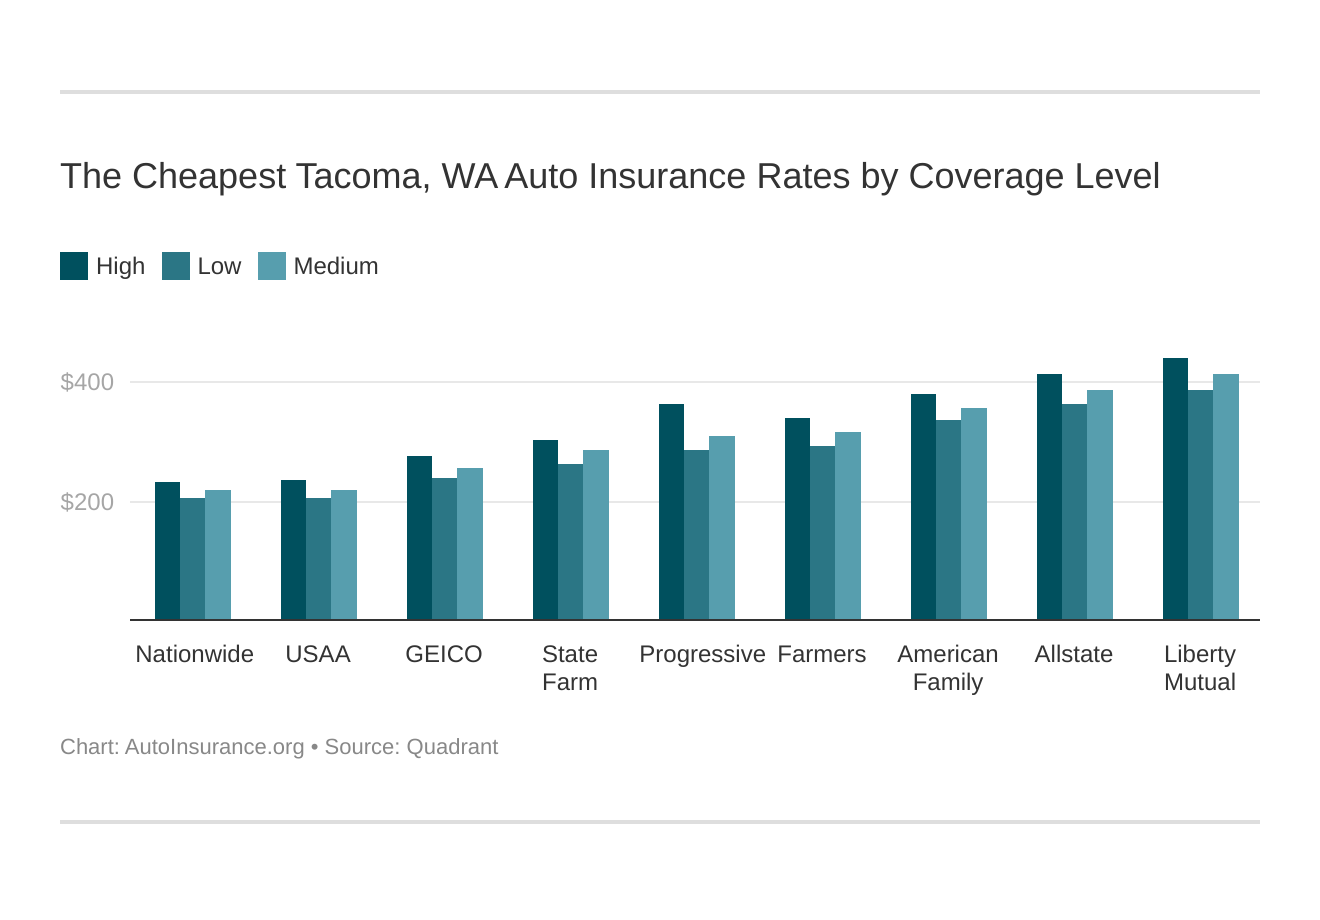 The Cheapest Tacoma, WA Auto Insurance Rates by Coverage Level